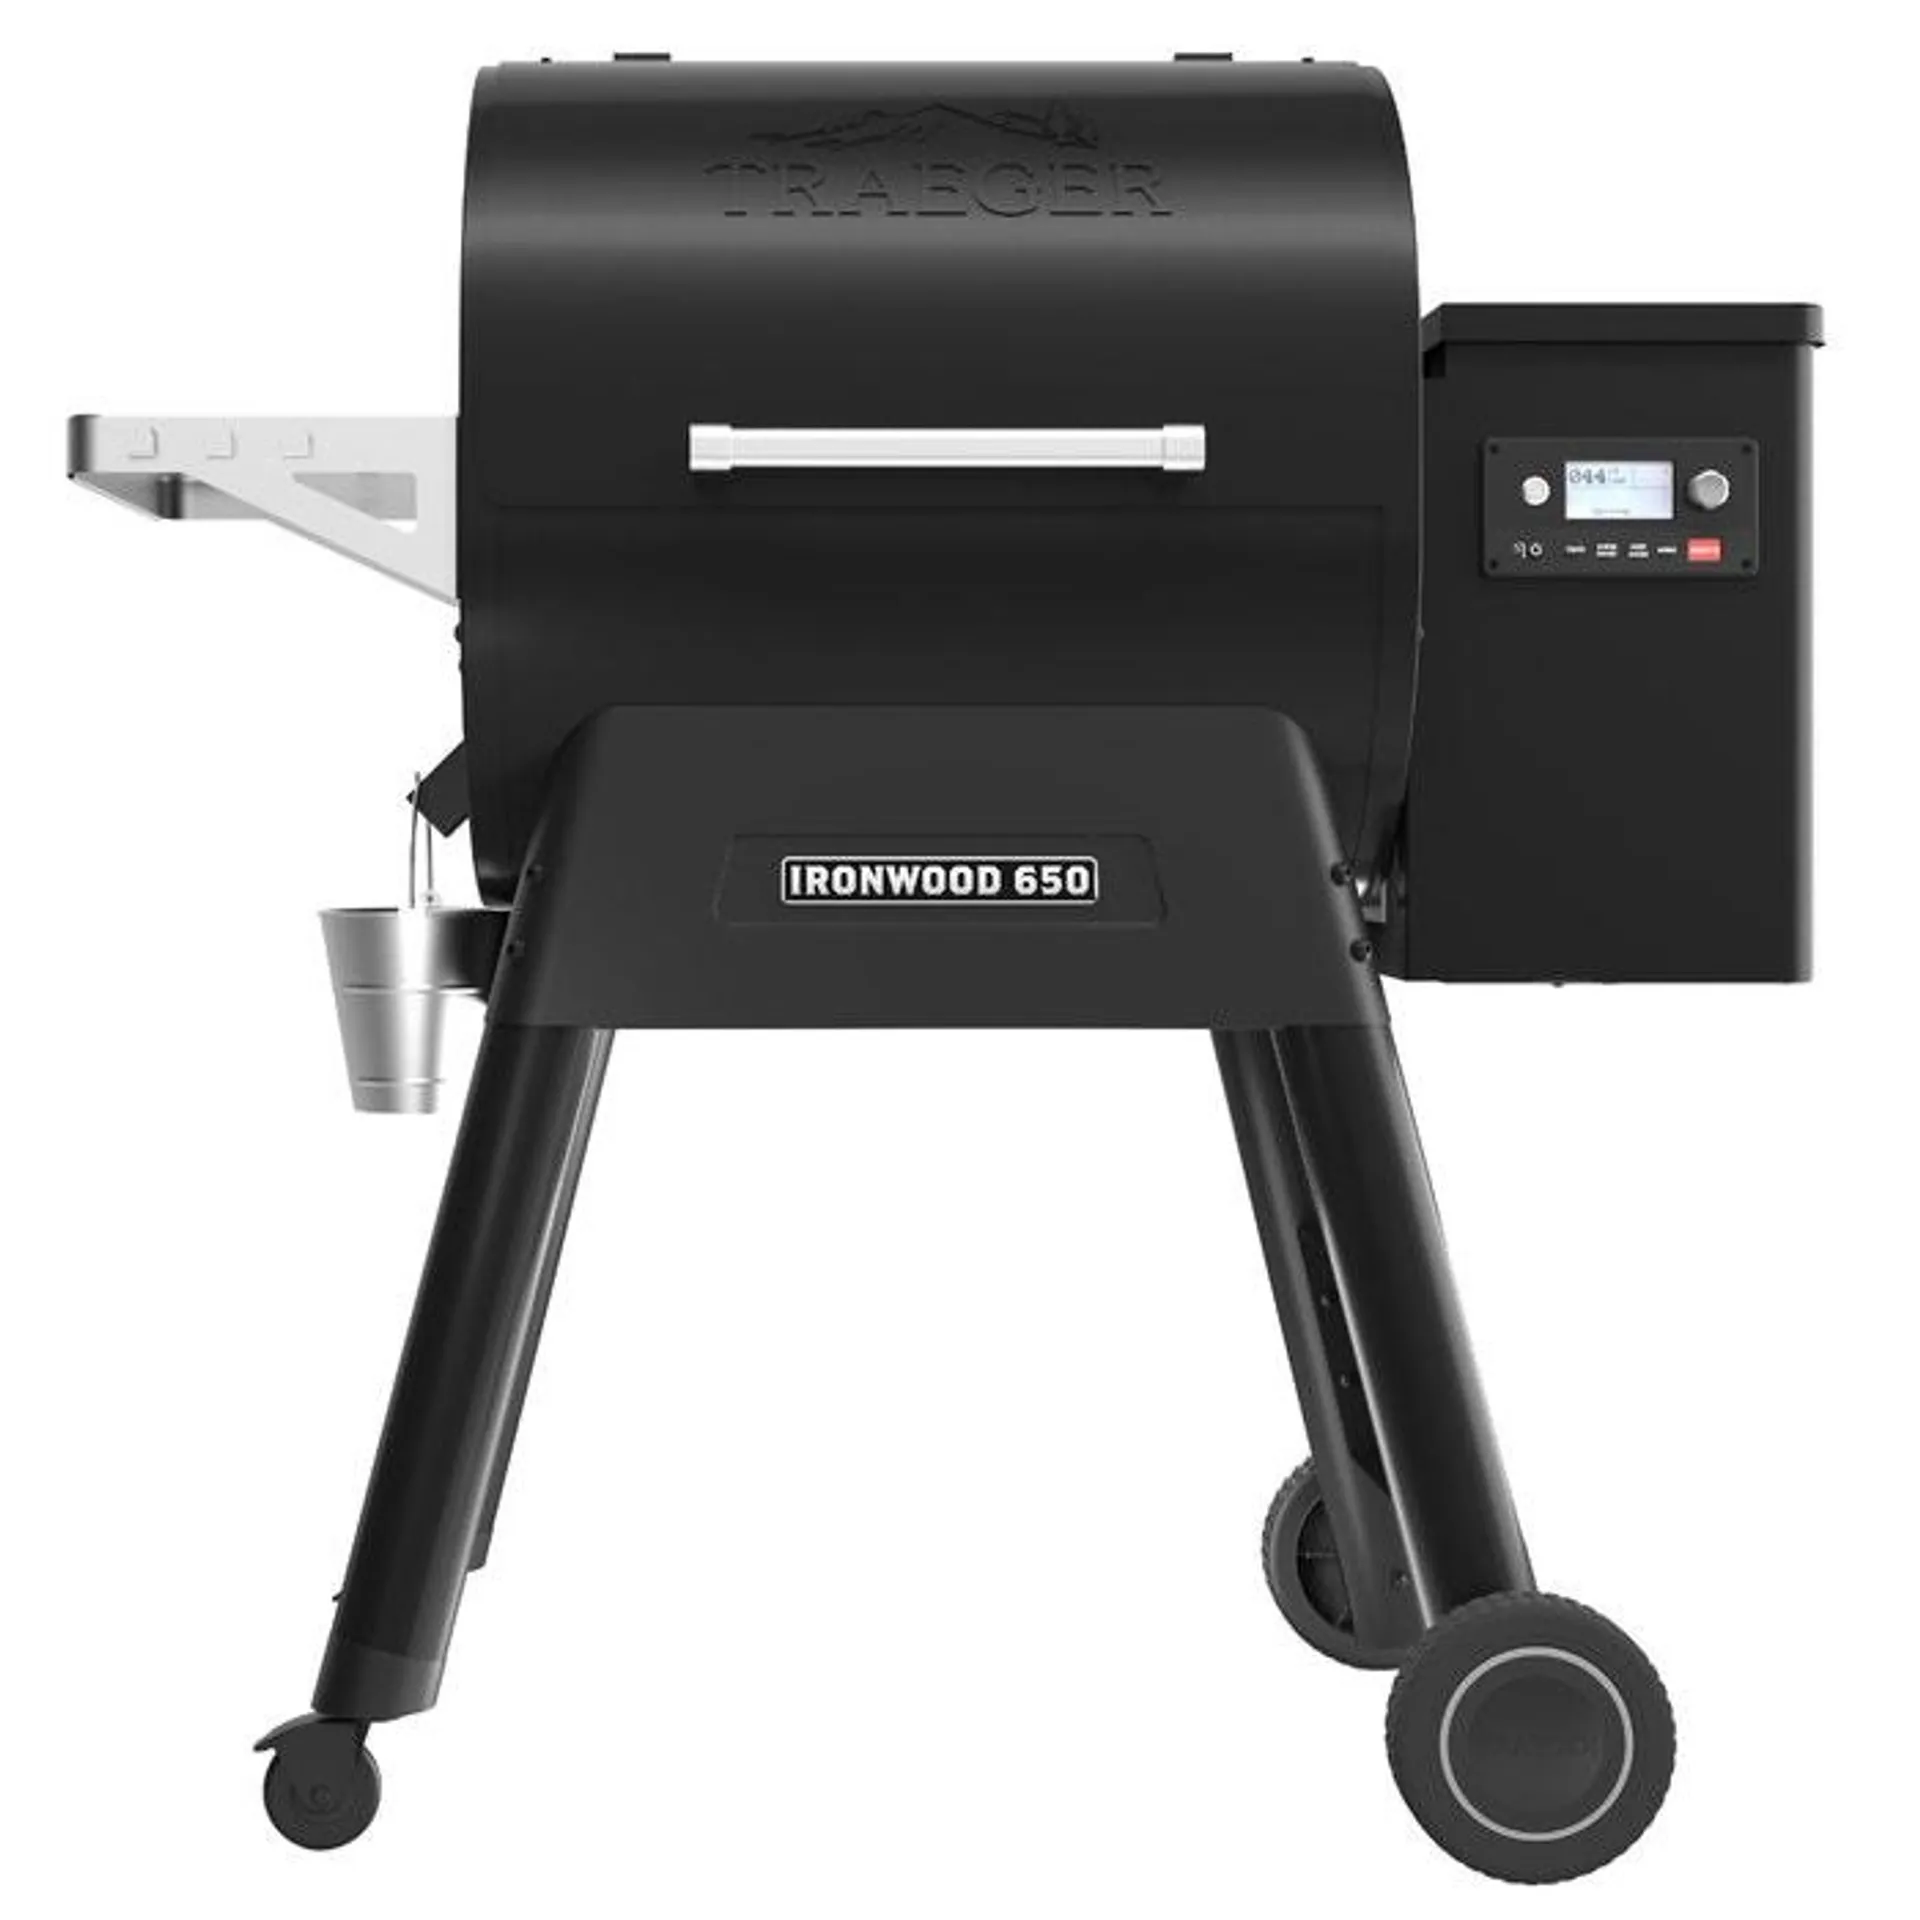 Traeger Ironwood 650 Wood Pellet Grill (Includes Cover and Pellets)